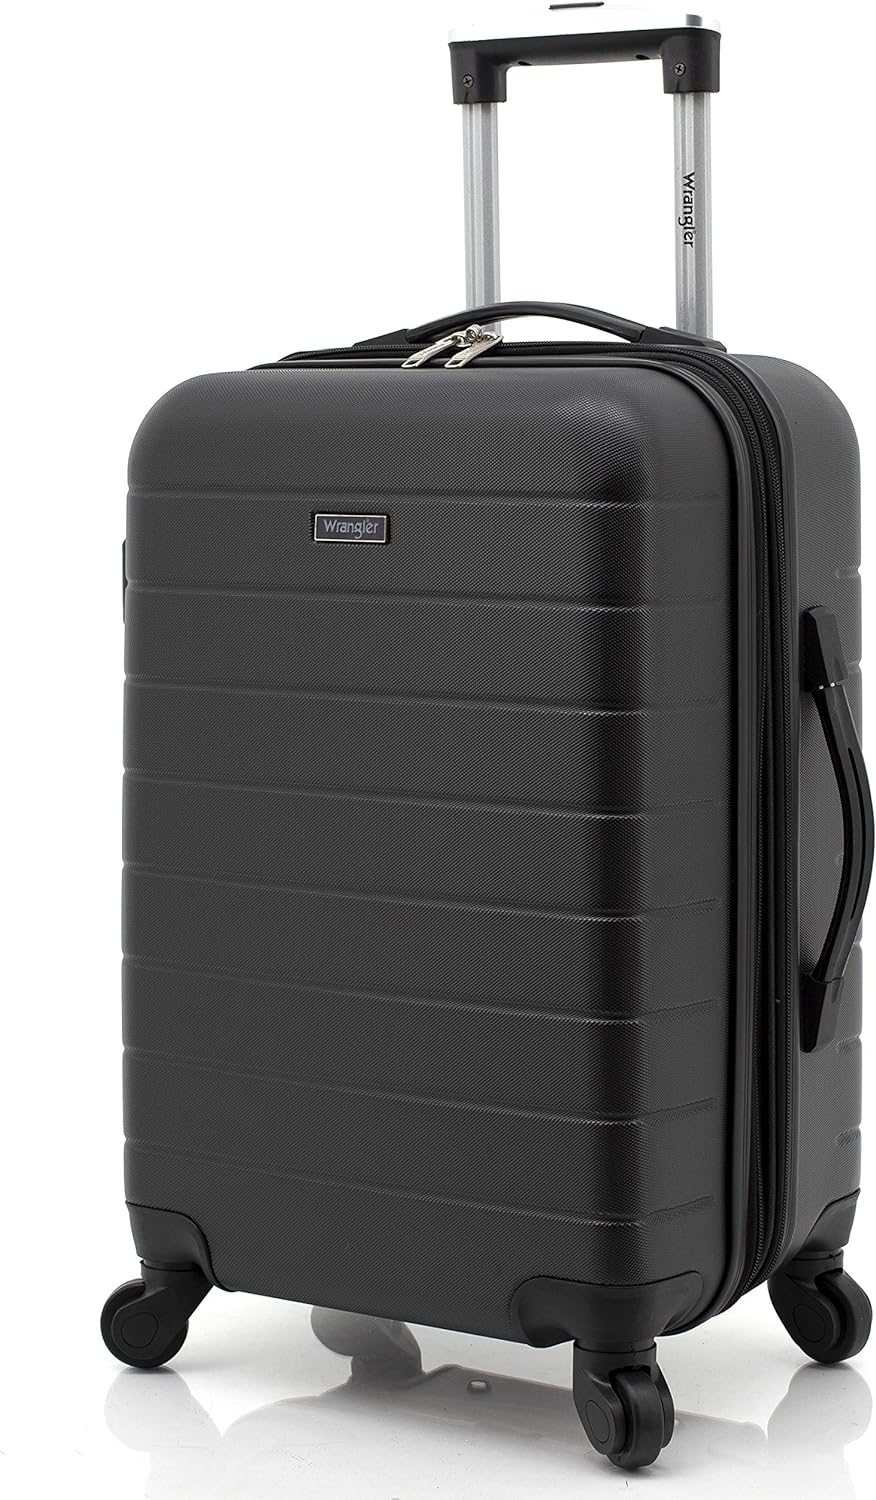 Wrangler 20" Smart Spinner Carry-On Luggage With Usb Charging Port ,Black 